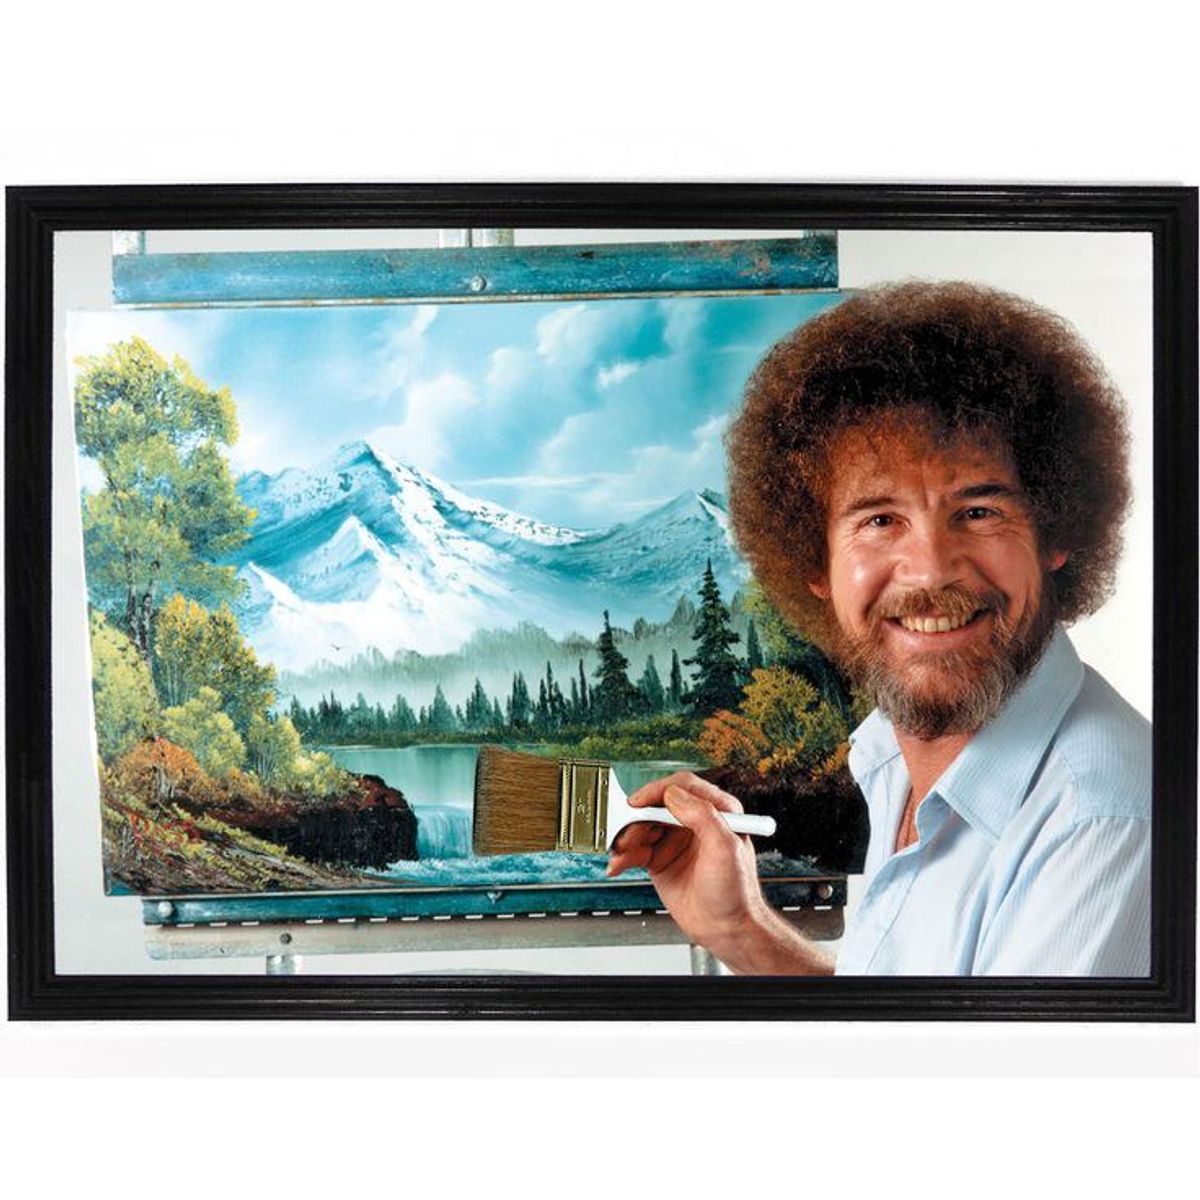 8 Pieces Of Advice From Bob Ross